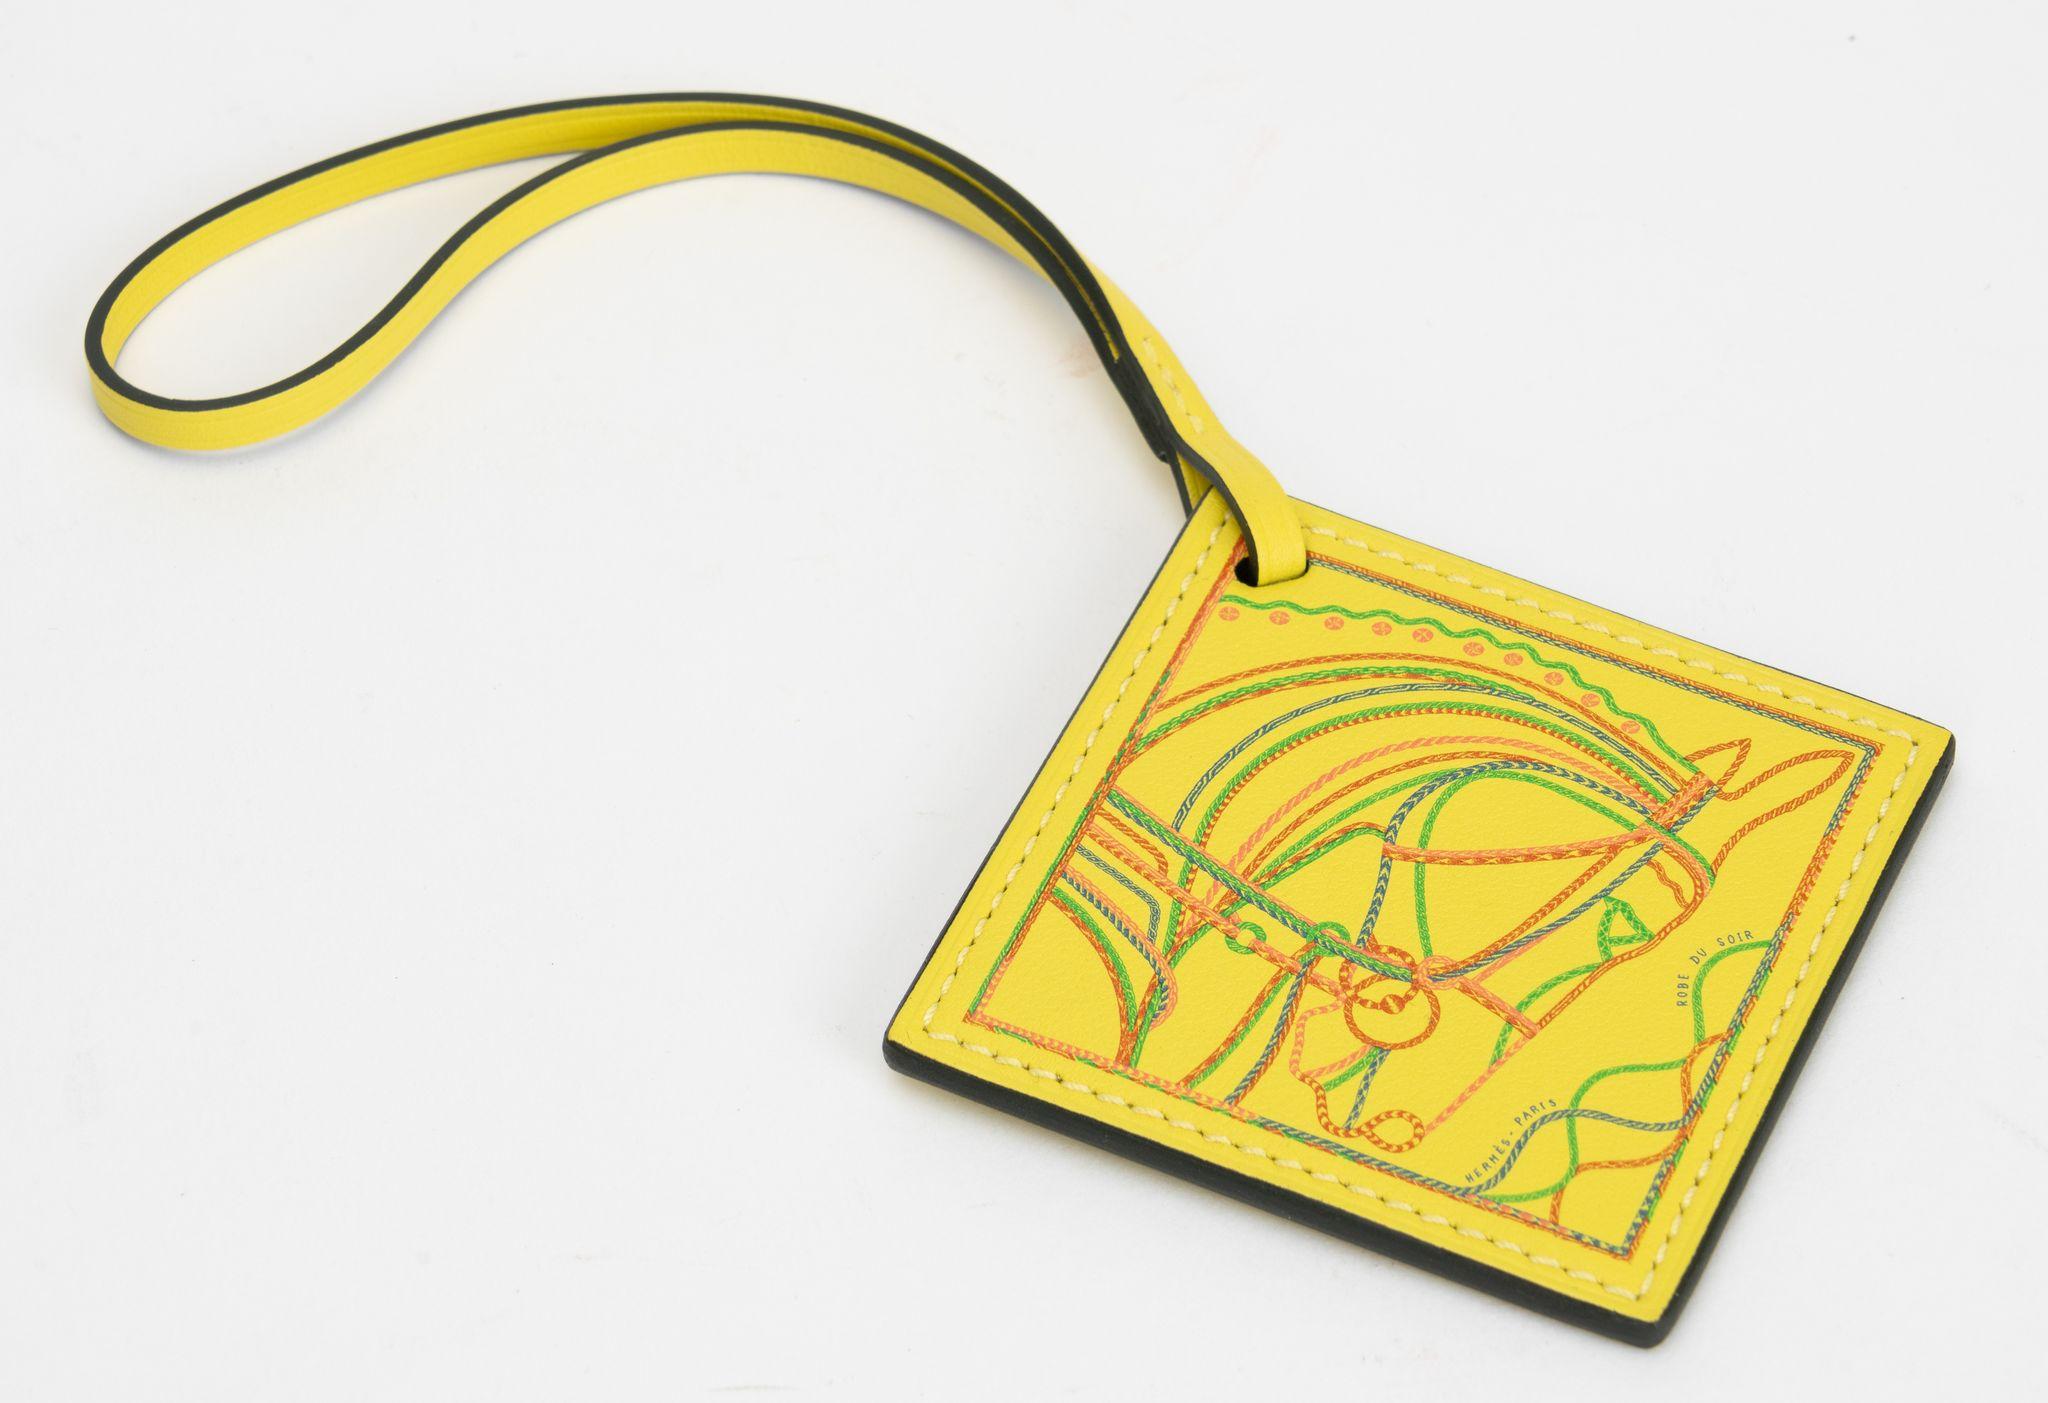 Hermès brand new lime yellow square bag charm with horse head design. Comes with original box